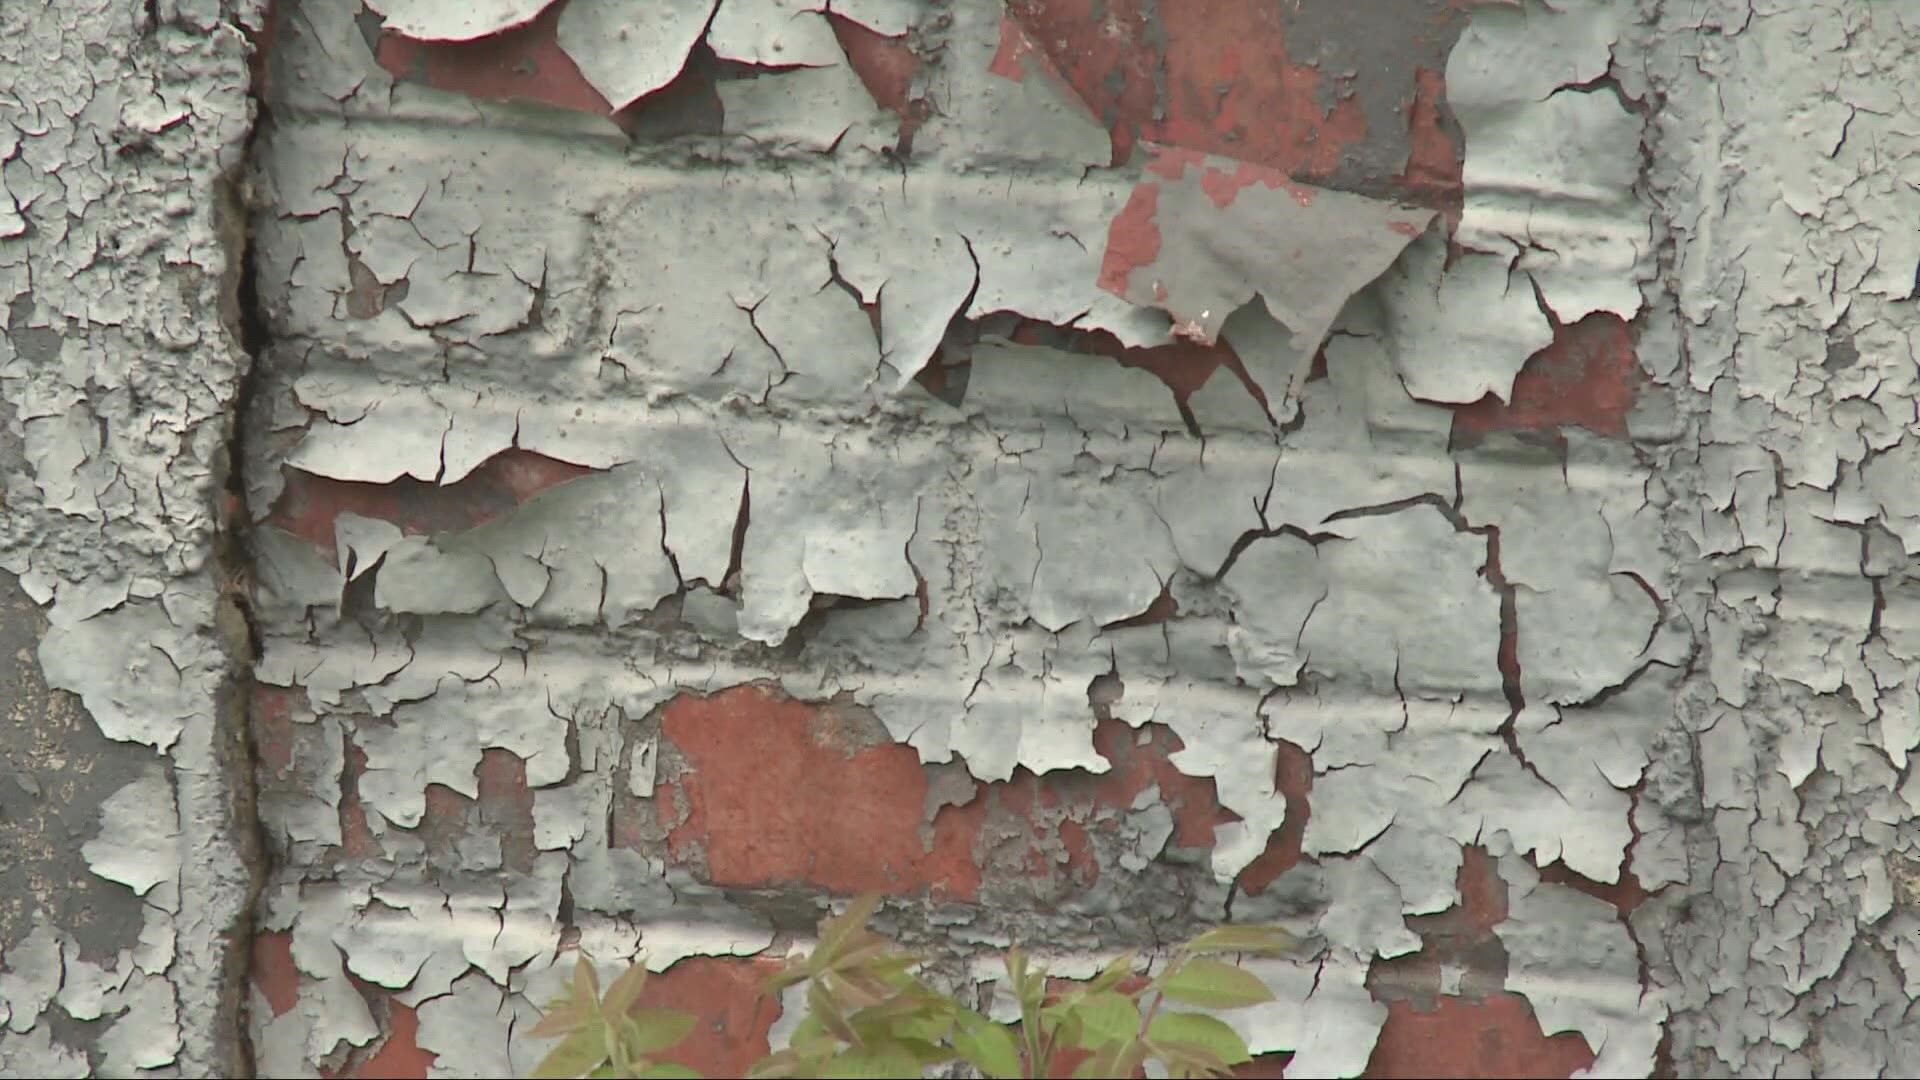 An estimated 1,000 children in Cleveland are affected by dangerous levels of lead each year.